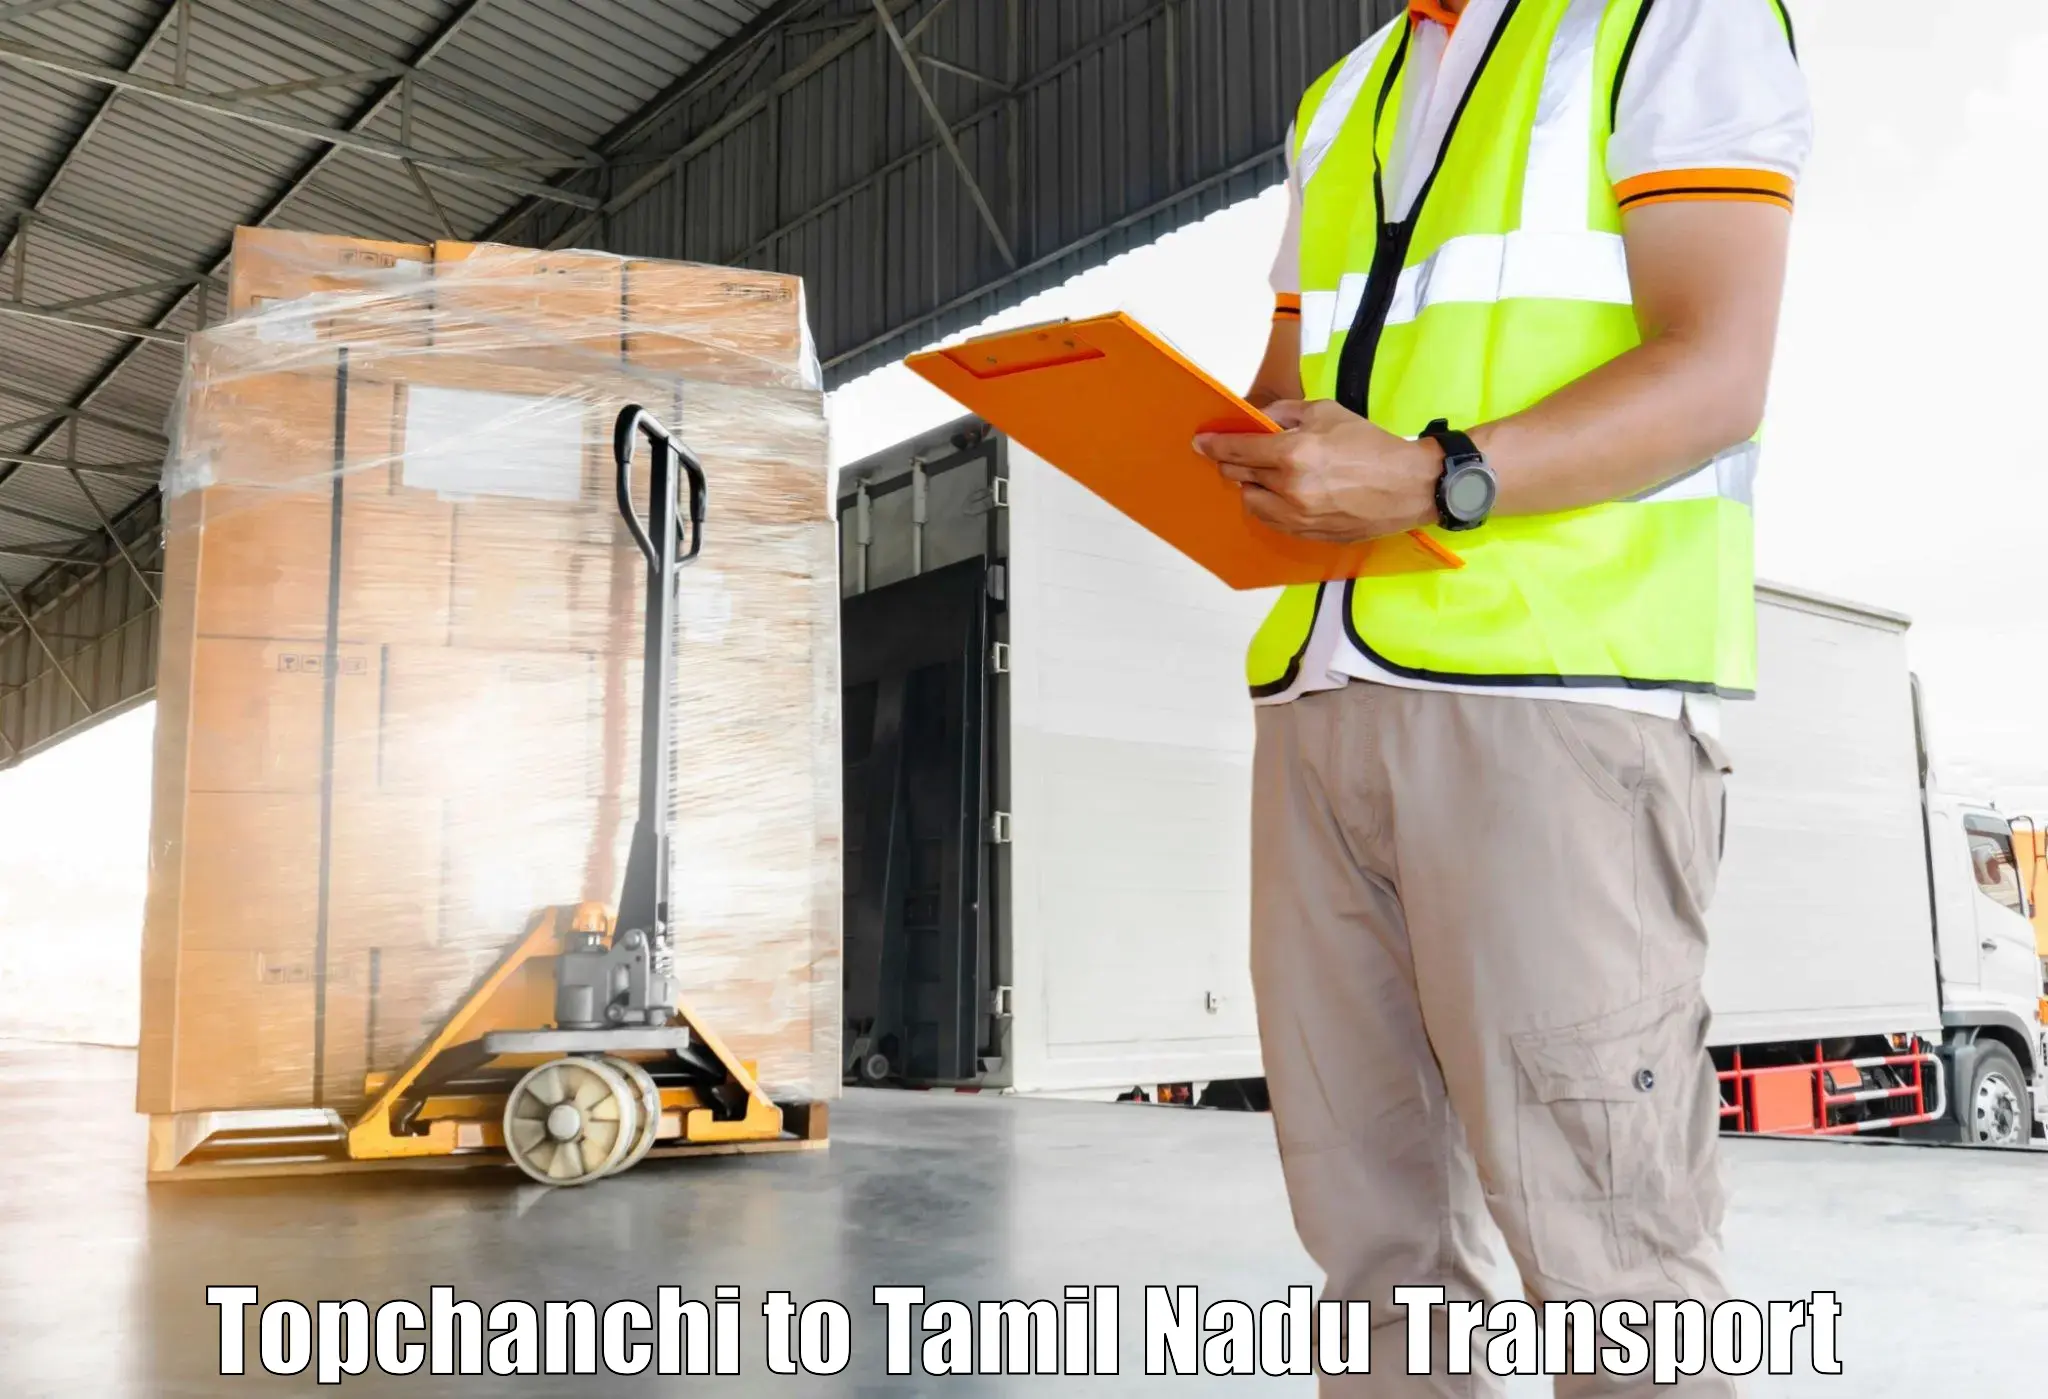 Cycle transportation service Topchanchi to Melur